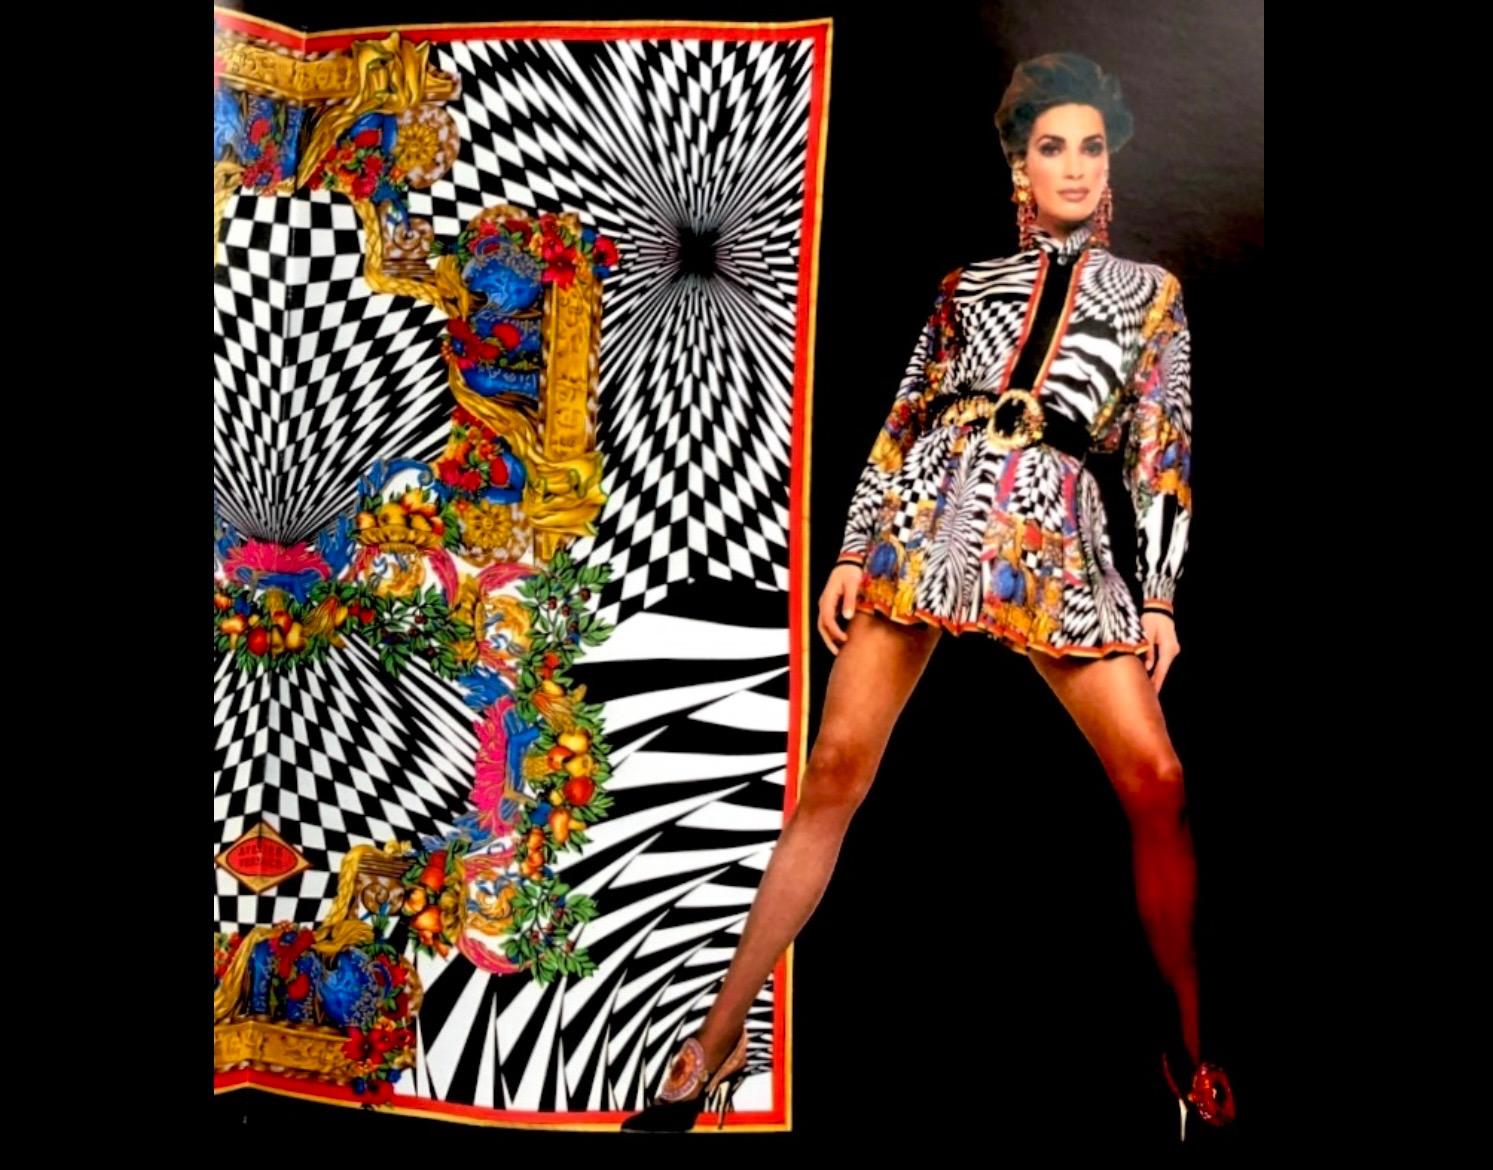 Presenting a fabulous vibrant silk Gianni Versace Couture skirt set designed by Gianni Versace. From the Fall/Winter of 1991, this set was highlighted in the season's lookbook photographed by Herb Ritts. This incredible set is covered in Gianni's